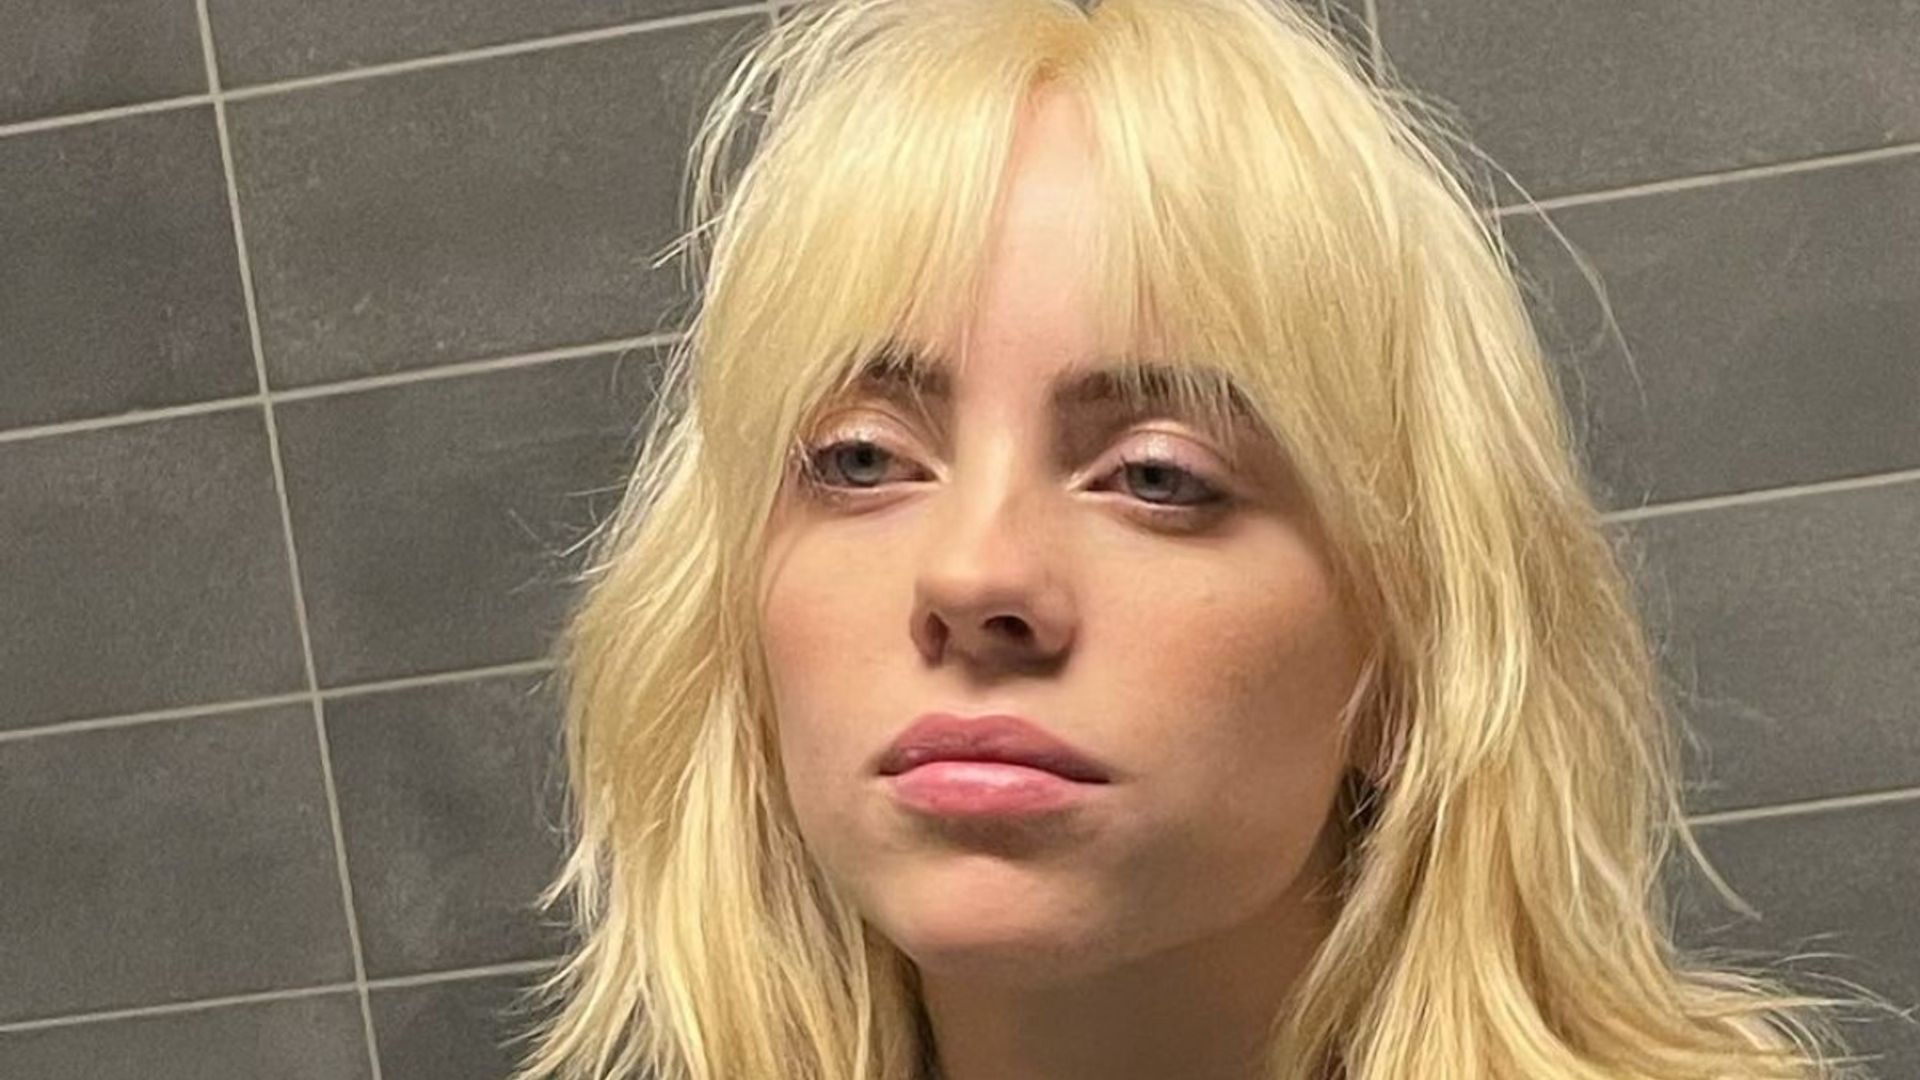 Billie Eilish keeps the excitement going with her new look to tease big return